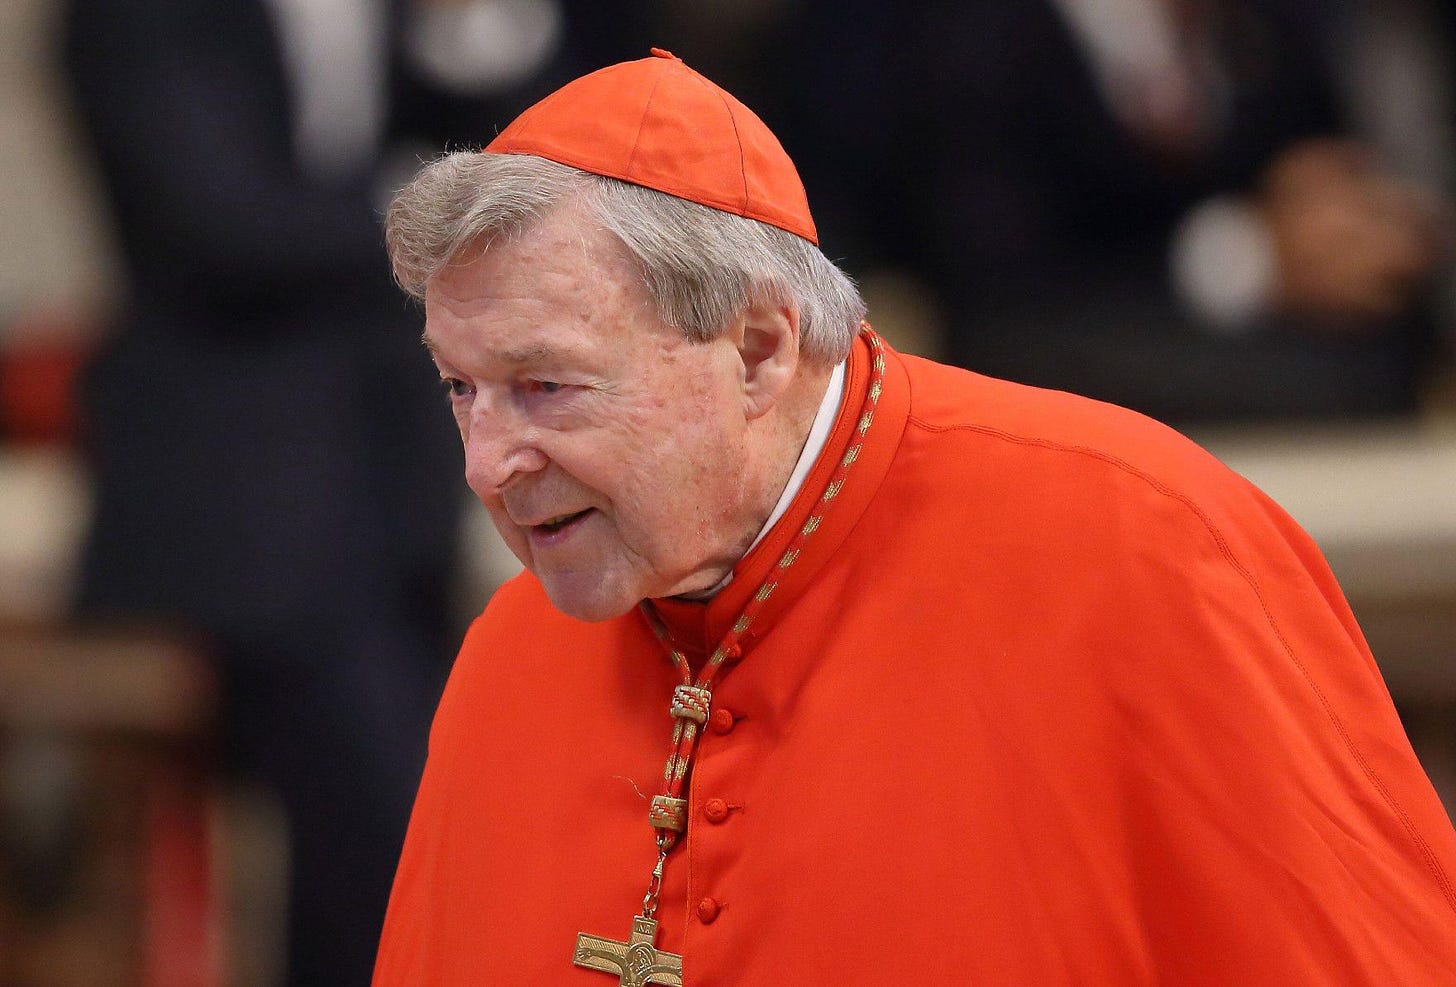 Protestors plan ‘Go to Hell’ march for Cardinal Pell’s burial